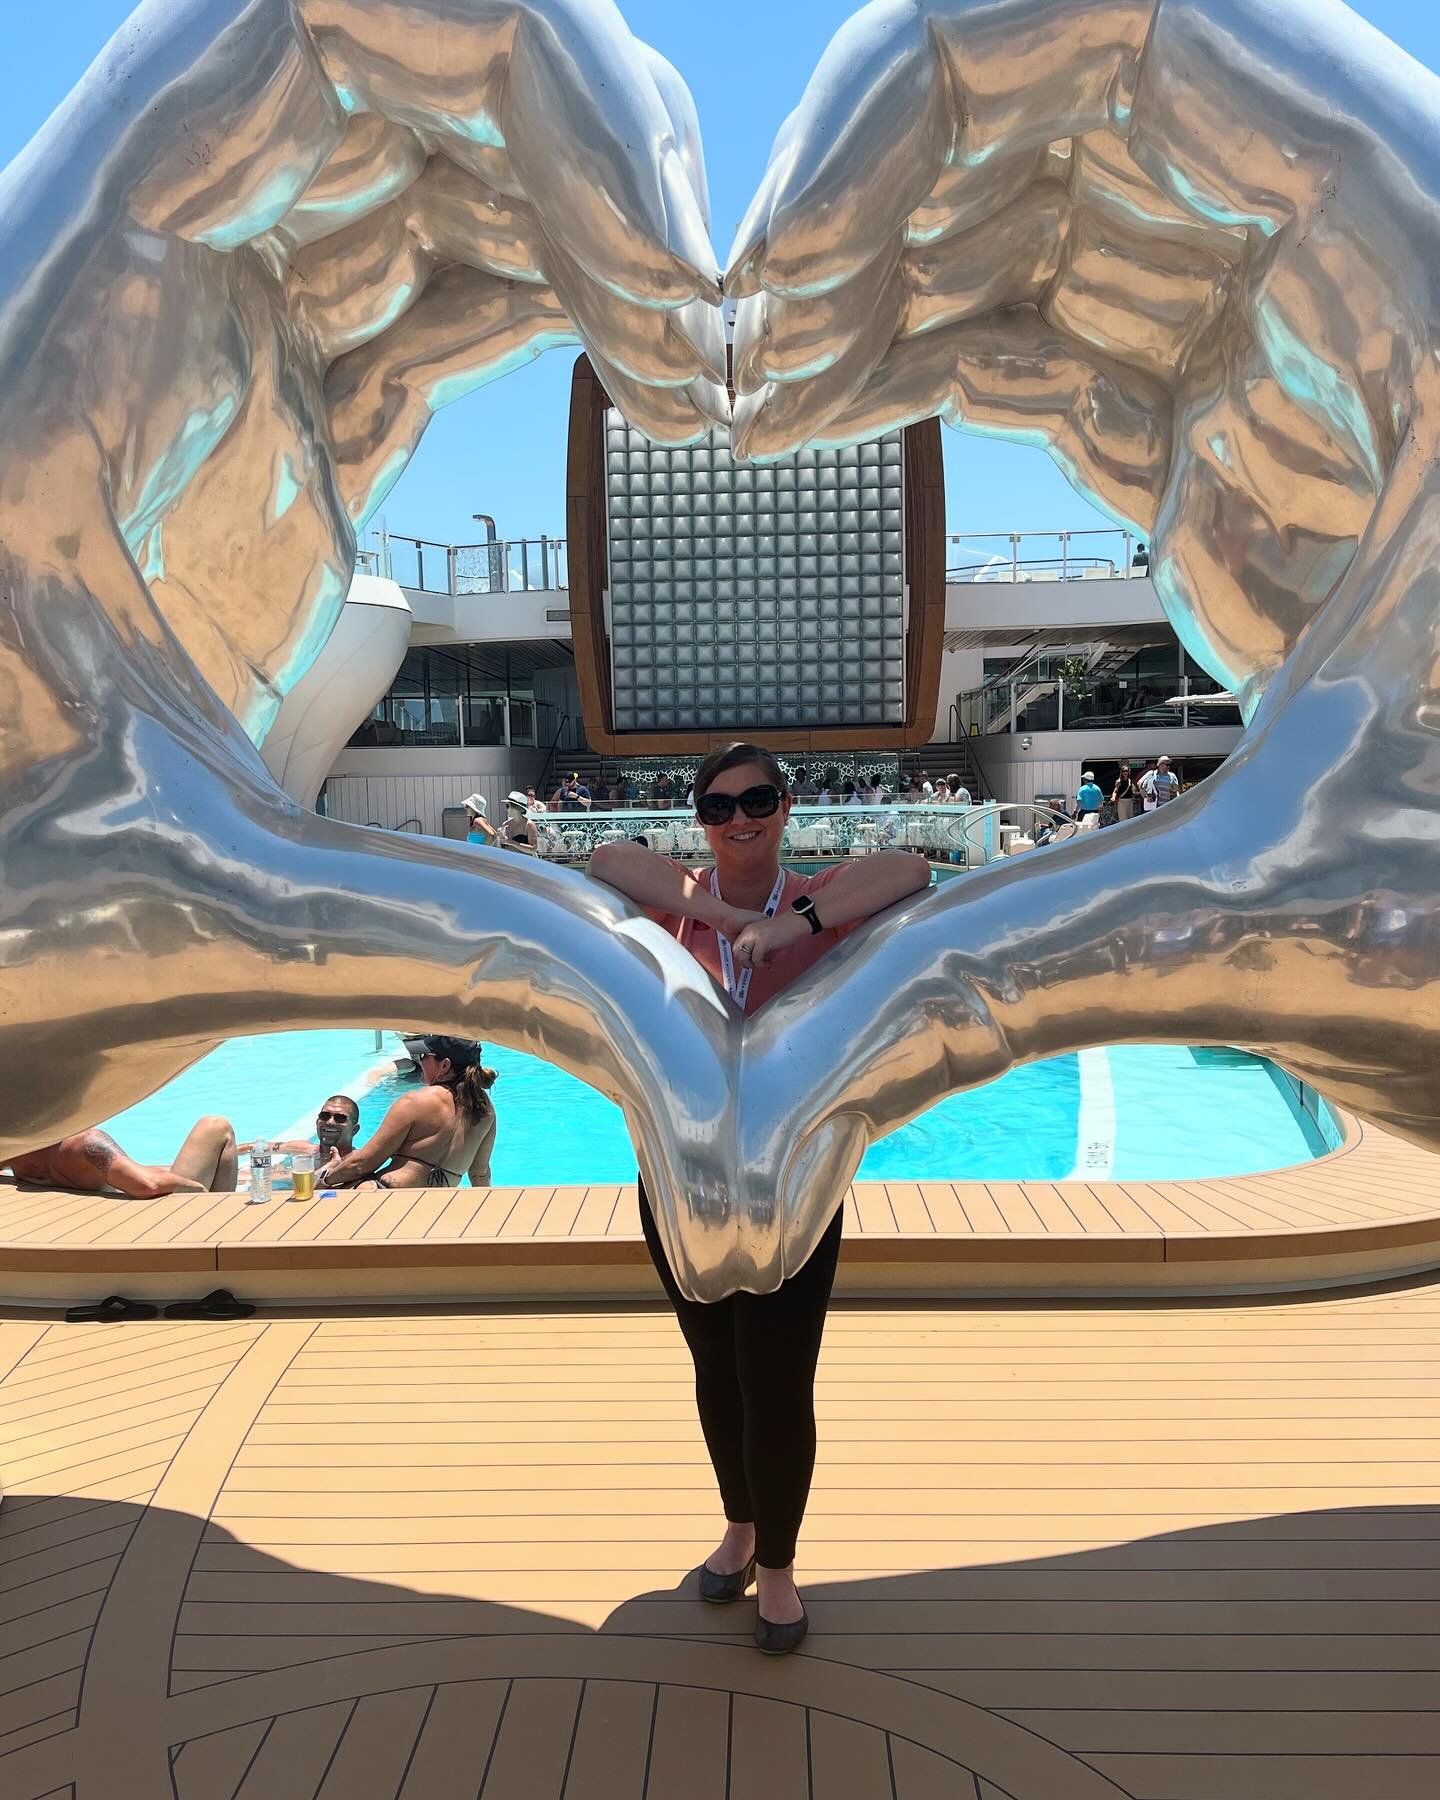 INVITED &bull; Last Saturday, I toured the Celebrity Apex as an Independent Travel Advisor and registered attendee of CLIA Cruise360 (an annual conference for travel advisors). 

The Celebrity Apex is the second of four (soon-to-be five) Edge-class c